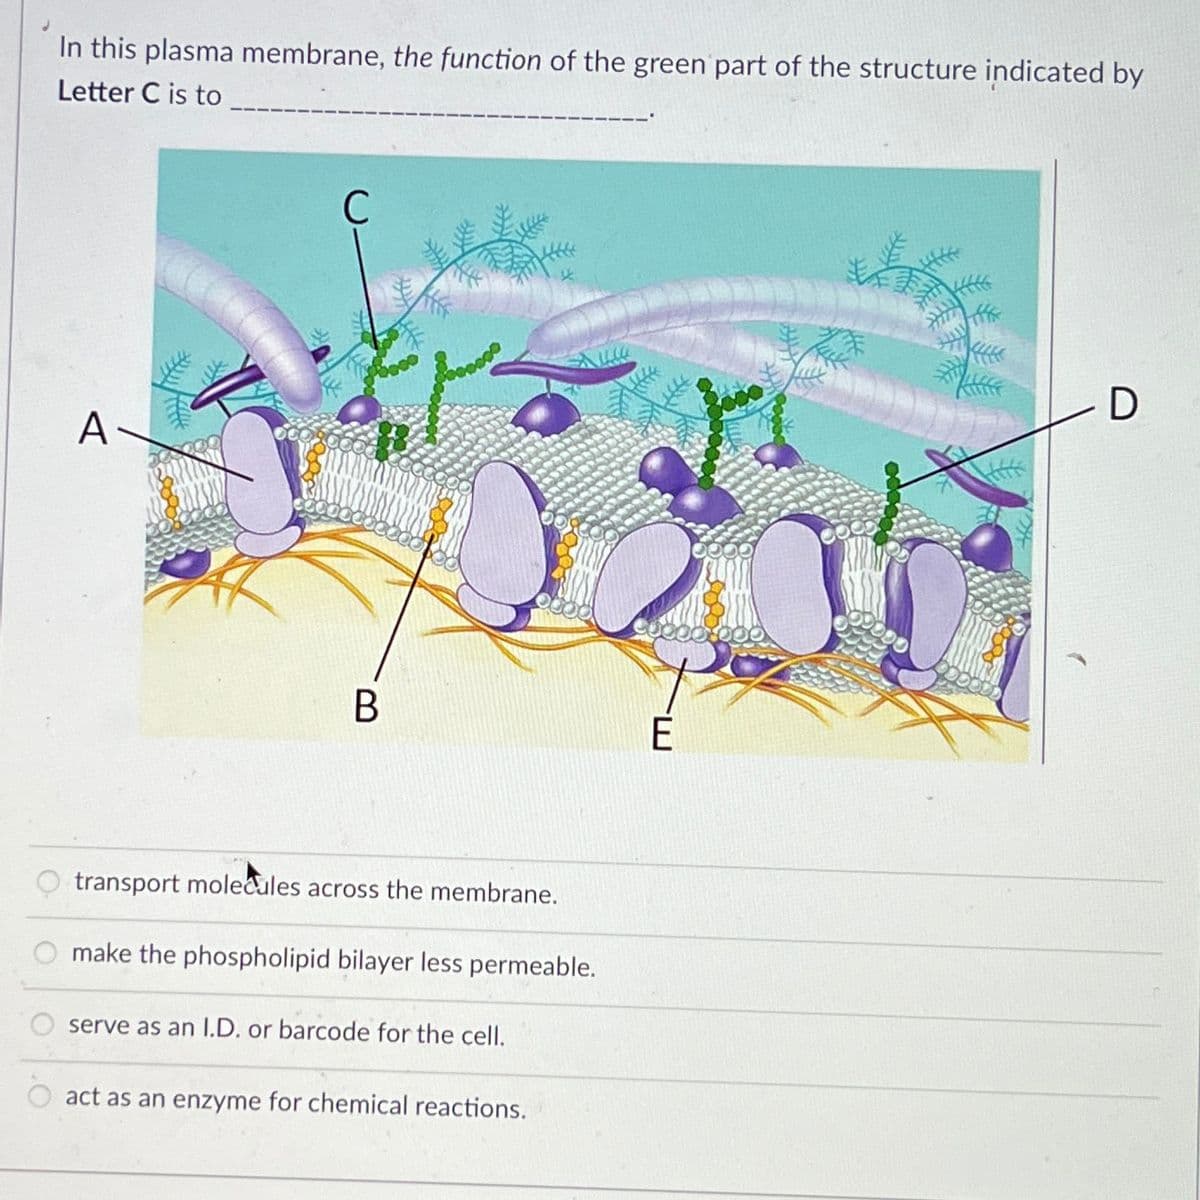 J
In this plasma membrane, the function of the green part of the structure indicated by
Letter C is to
A
C
B
transport molecules across the membrane.
0000
make the phospholipid bilayer less permeable.
serve as an I.D. or barcode for the cell.
act as an enzyme for chemical reactions.
E
K
D